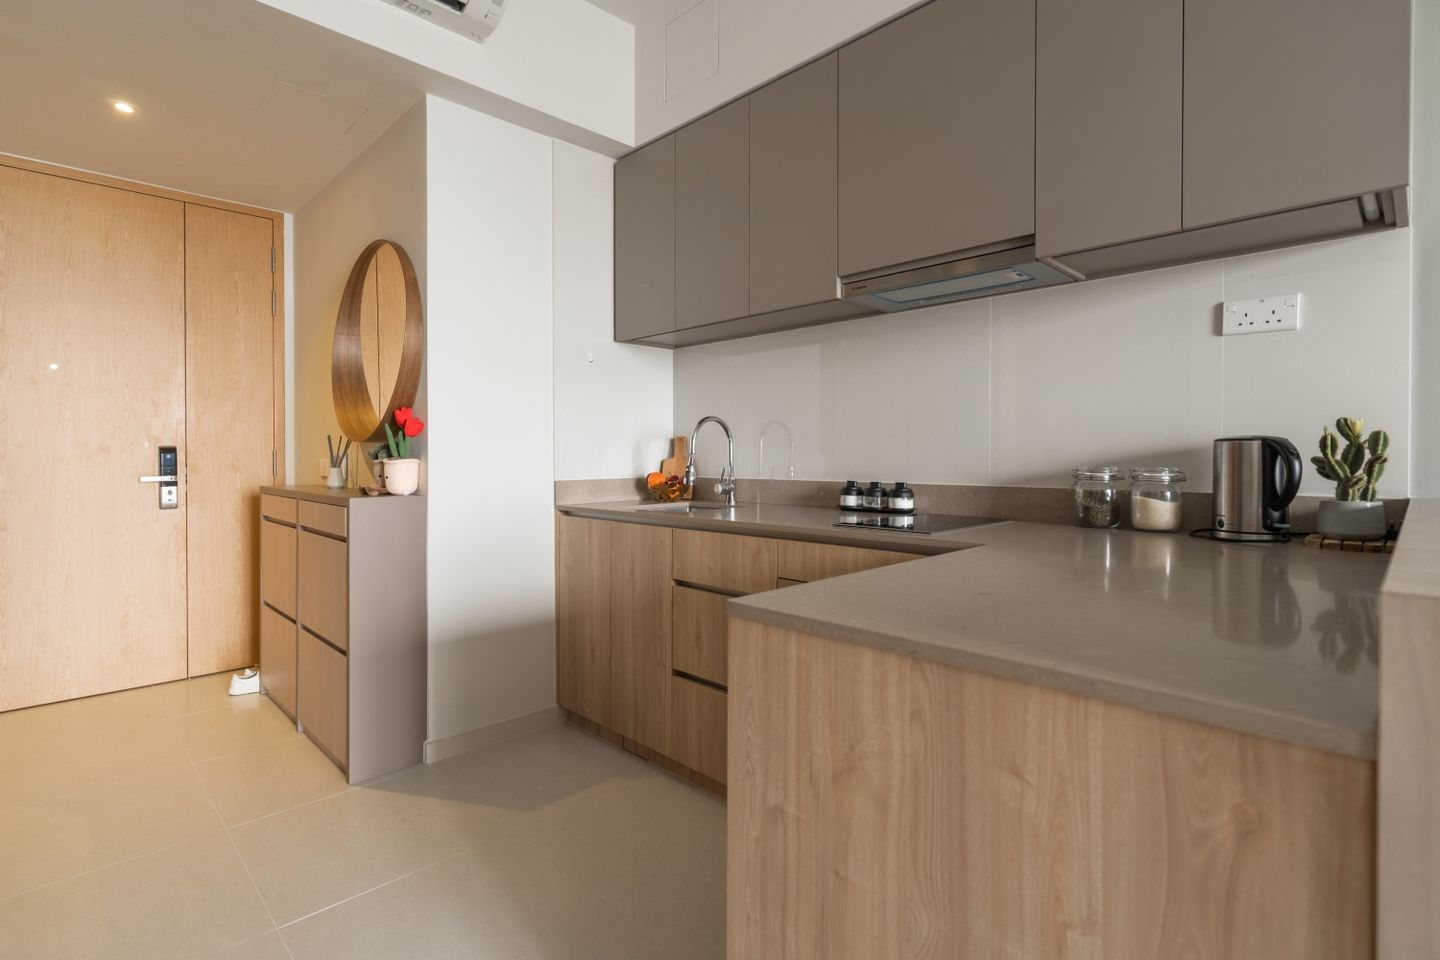 L-Shaped Kitchen With A Scandinavian Design And A Neutral Palette